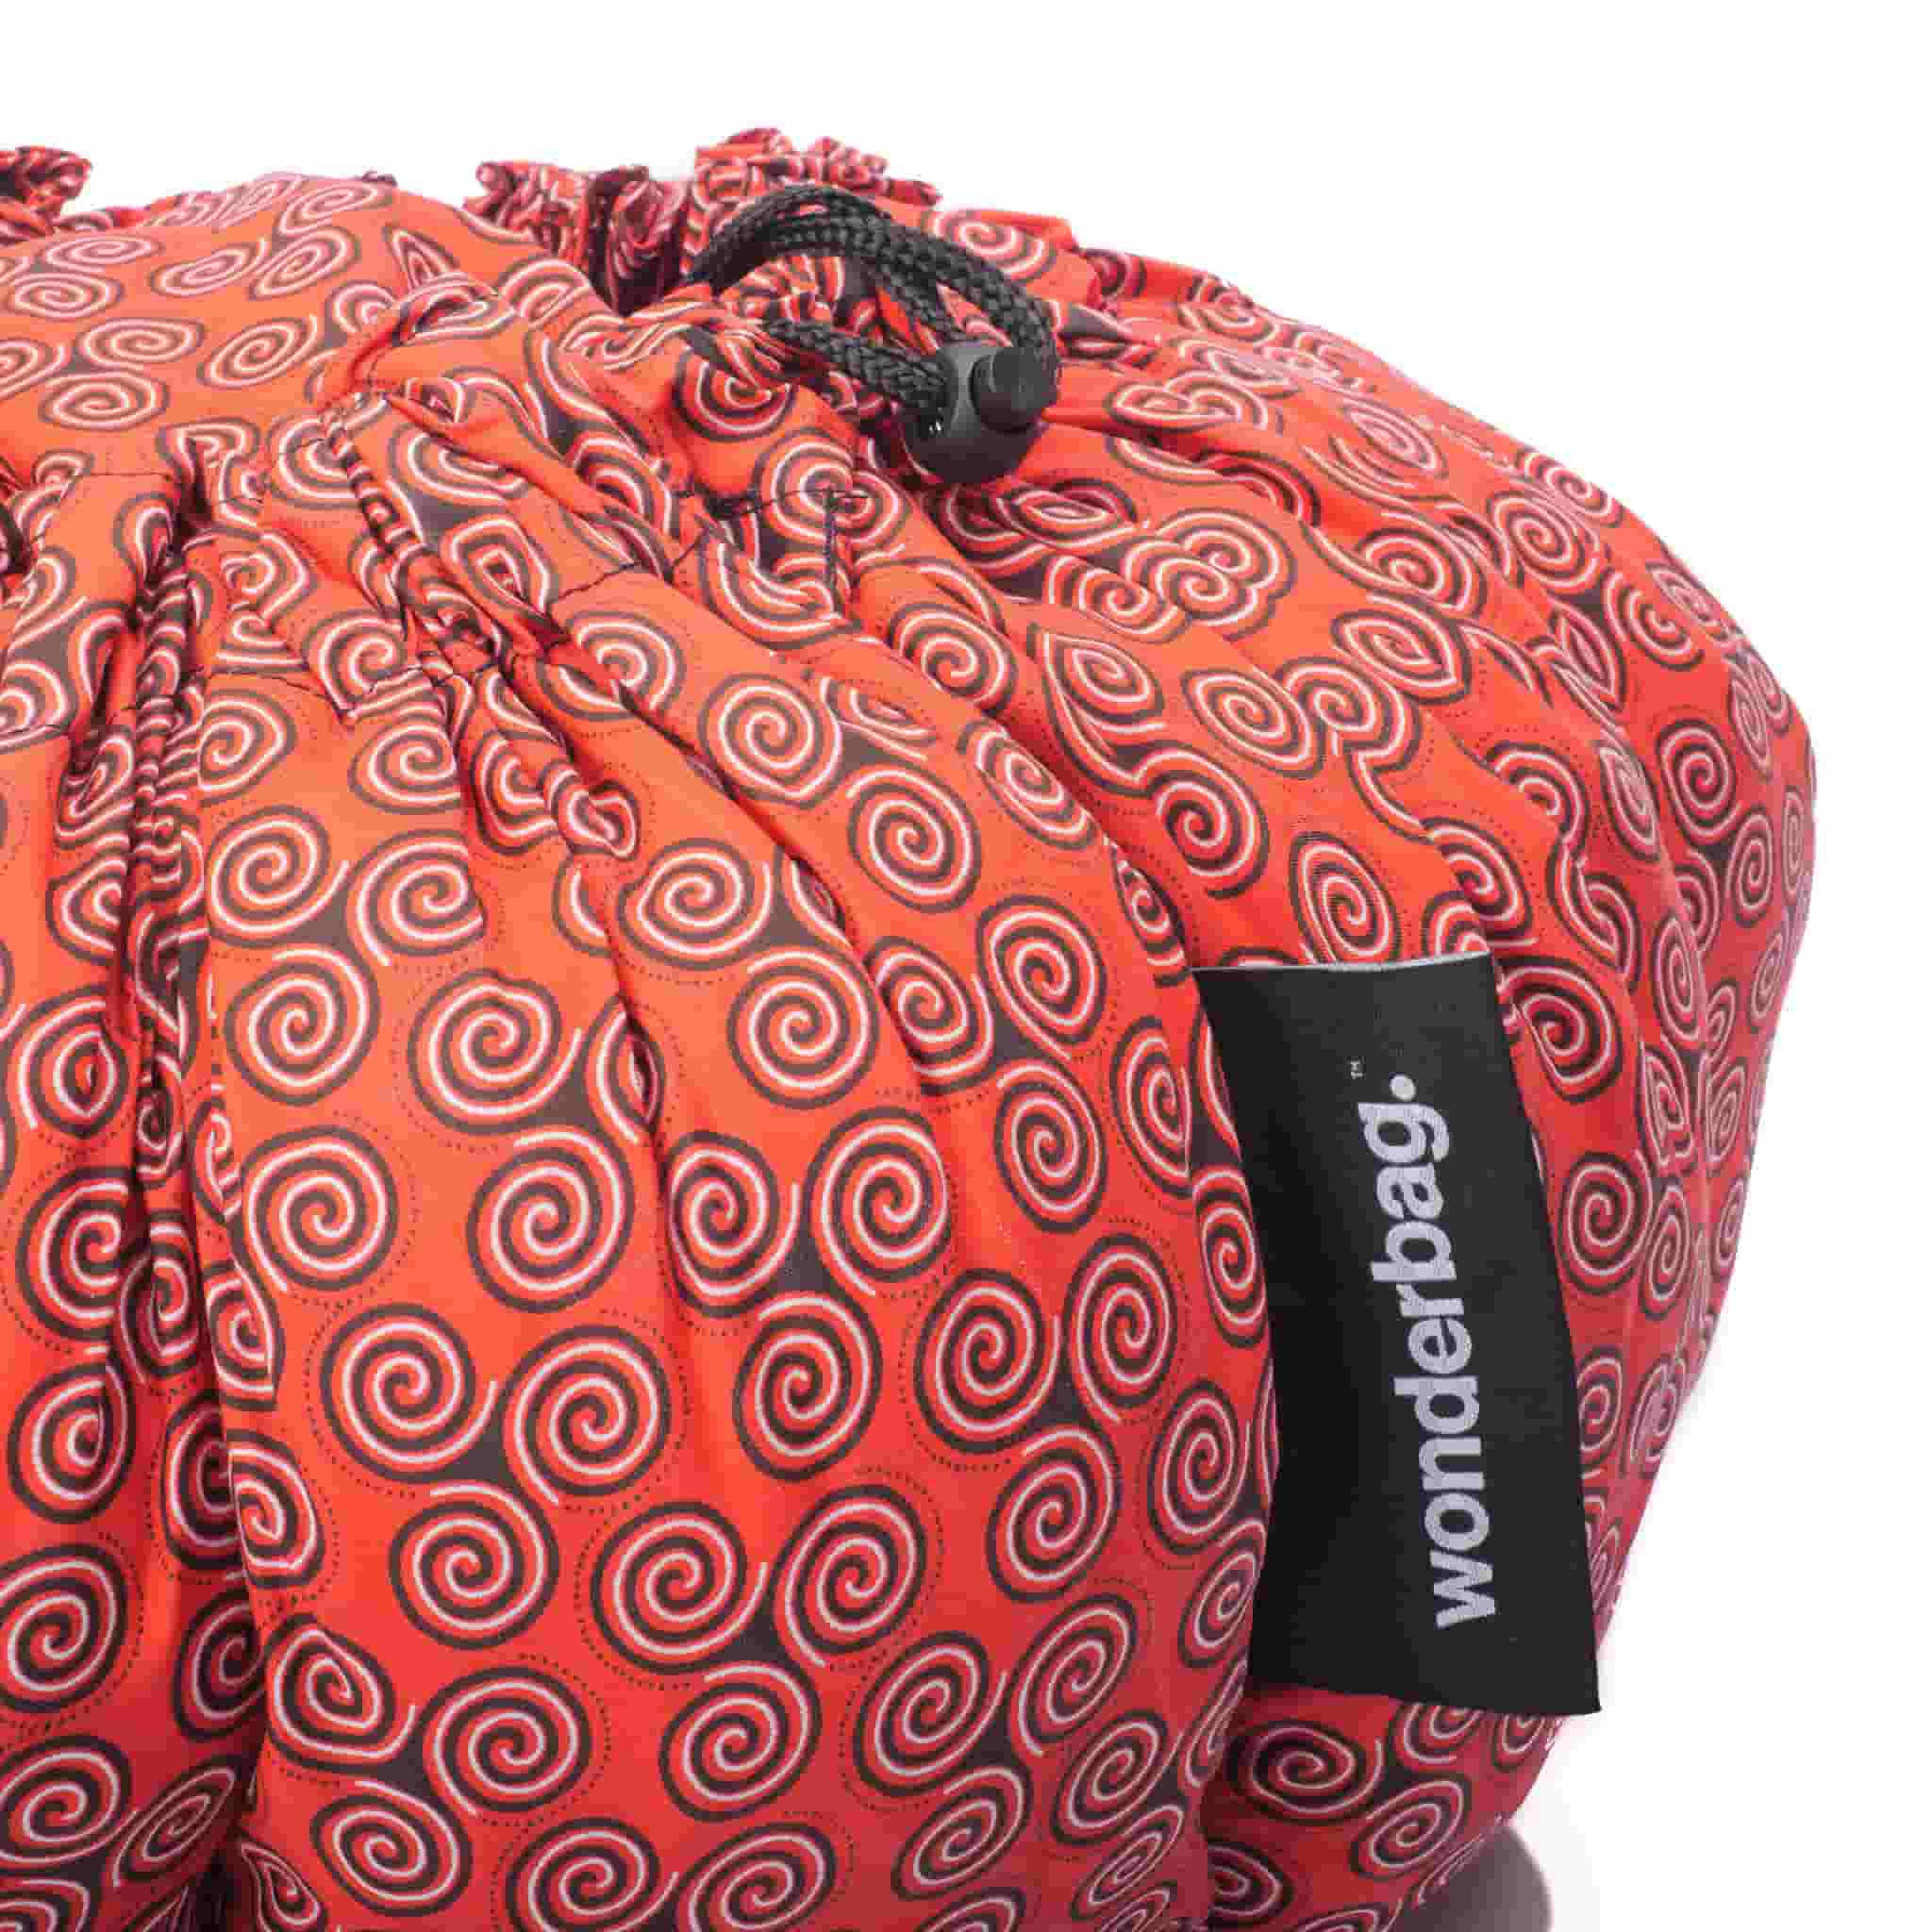 Wonderbag Non-Electric Slow Cooker, Red